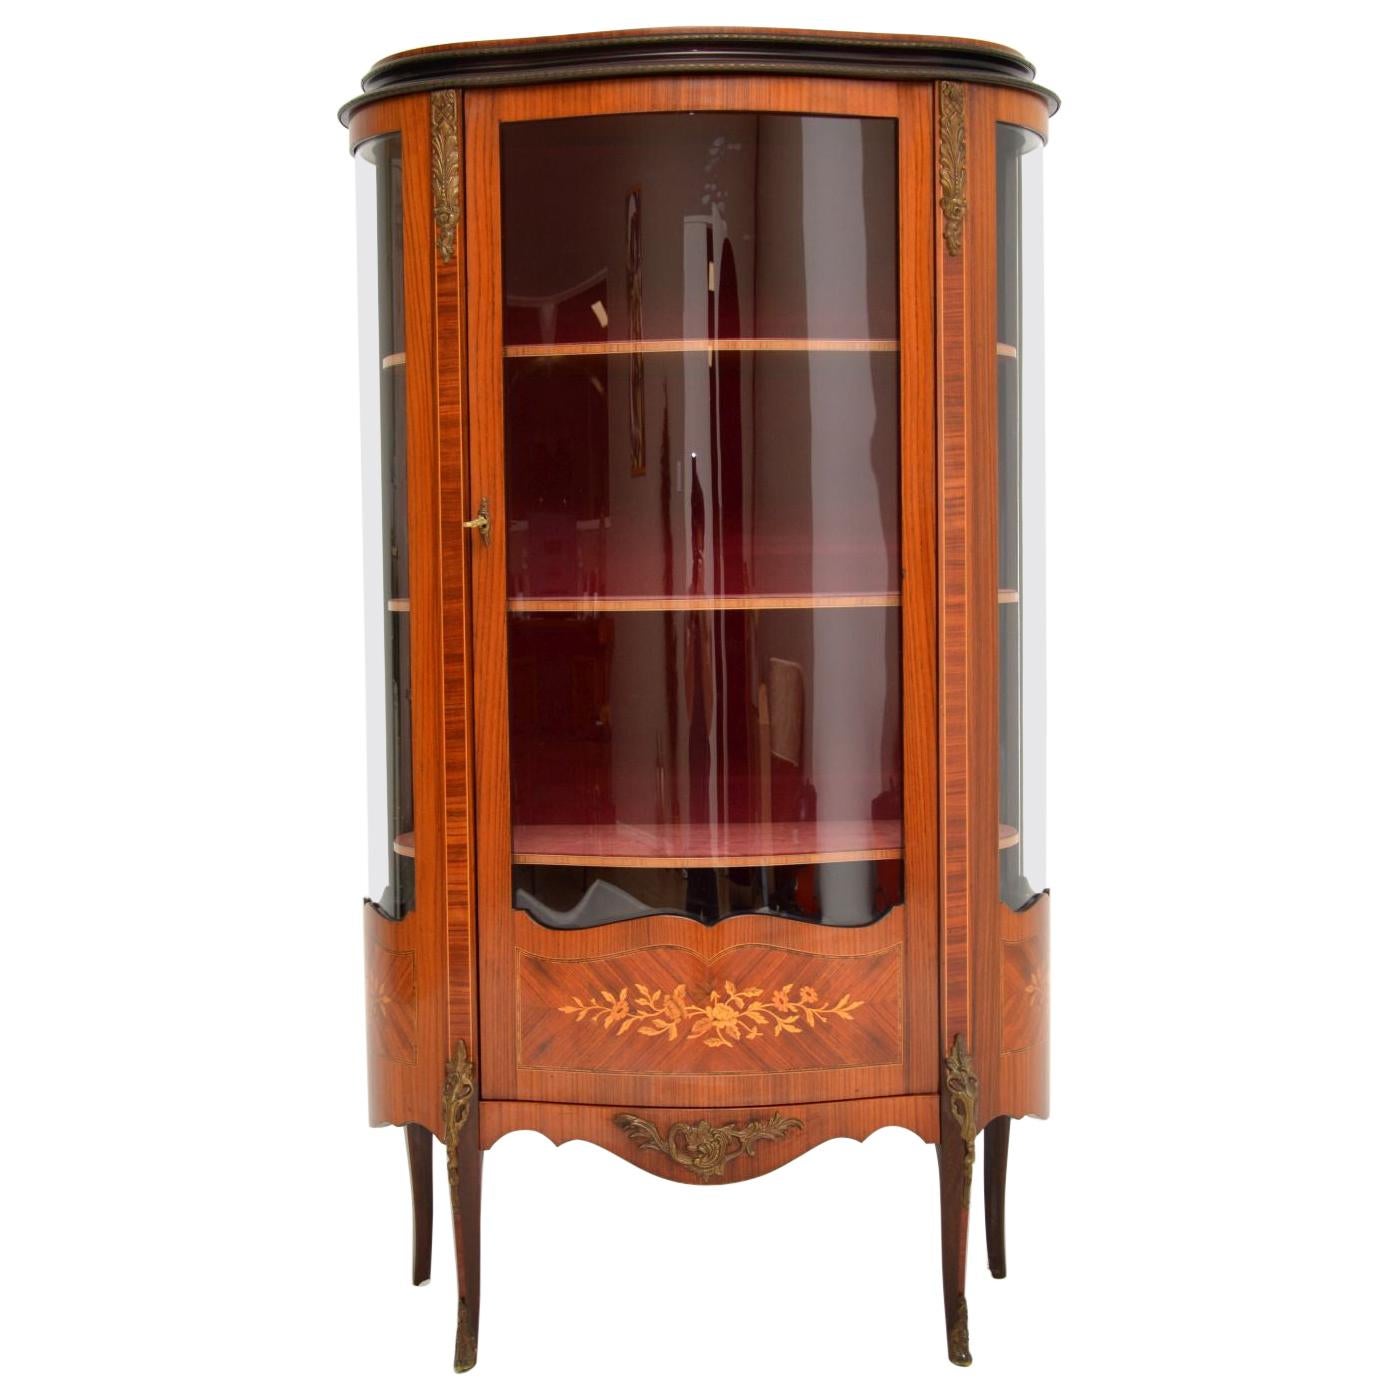 Antique French Style Inlaid Marquetry Display Cabinet